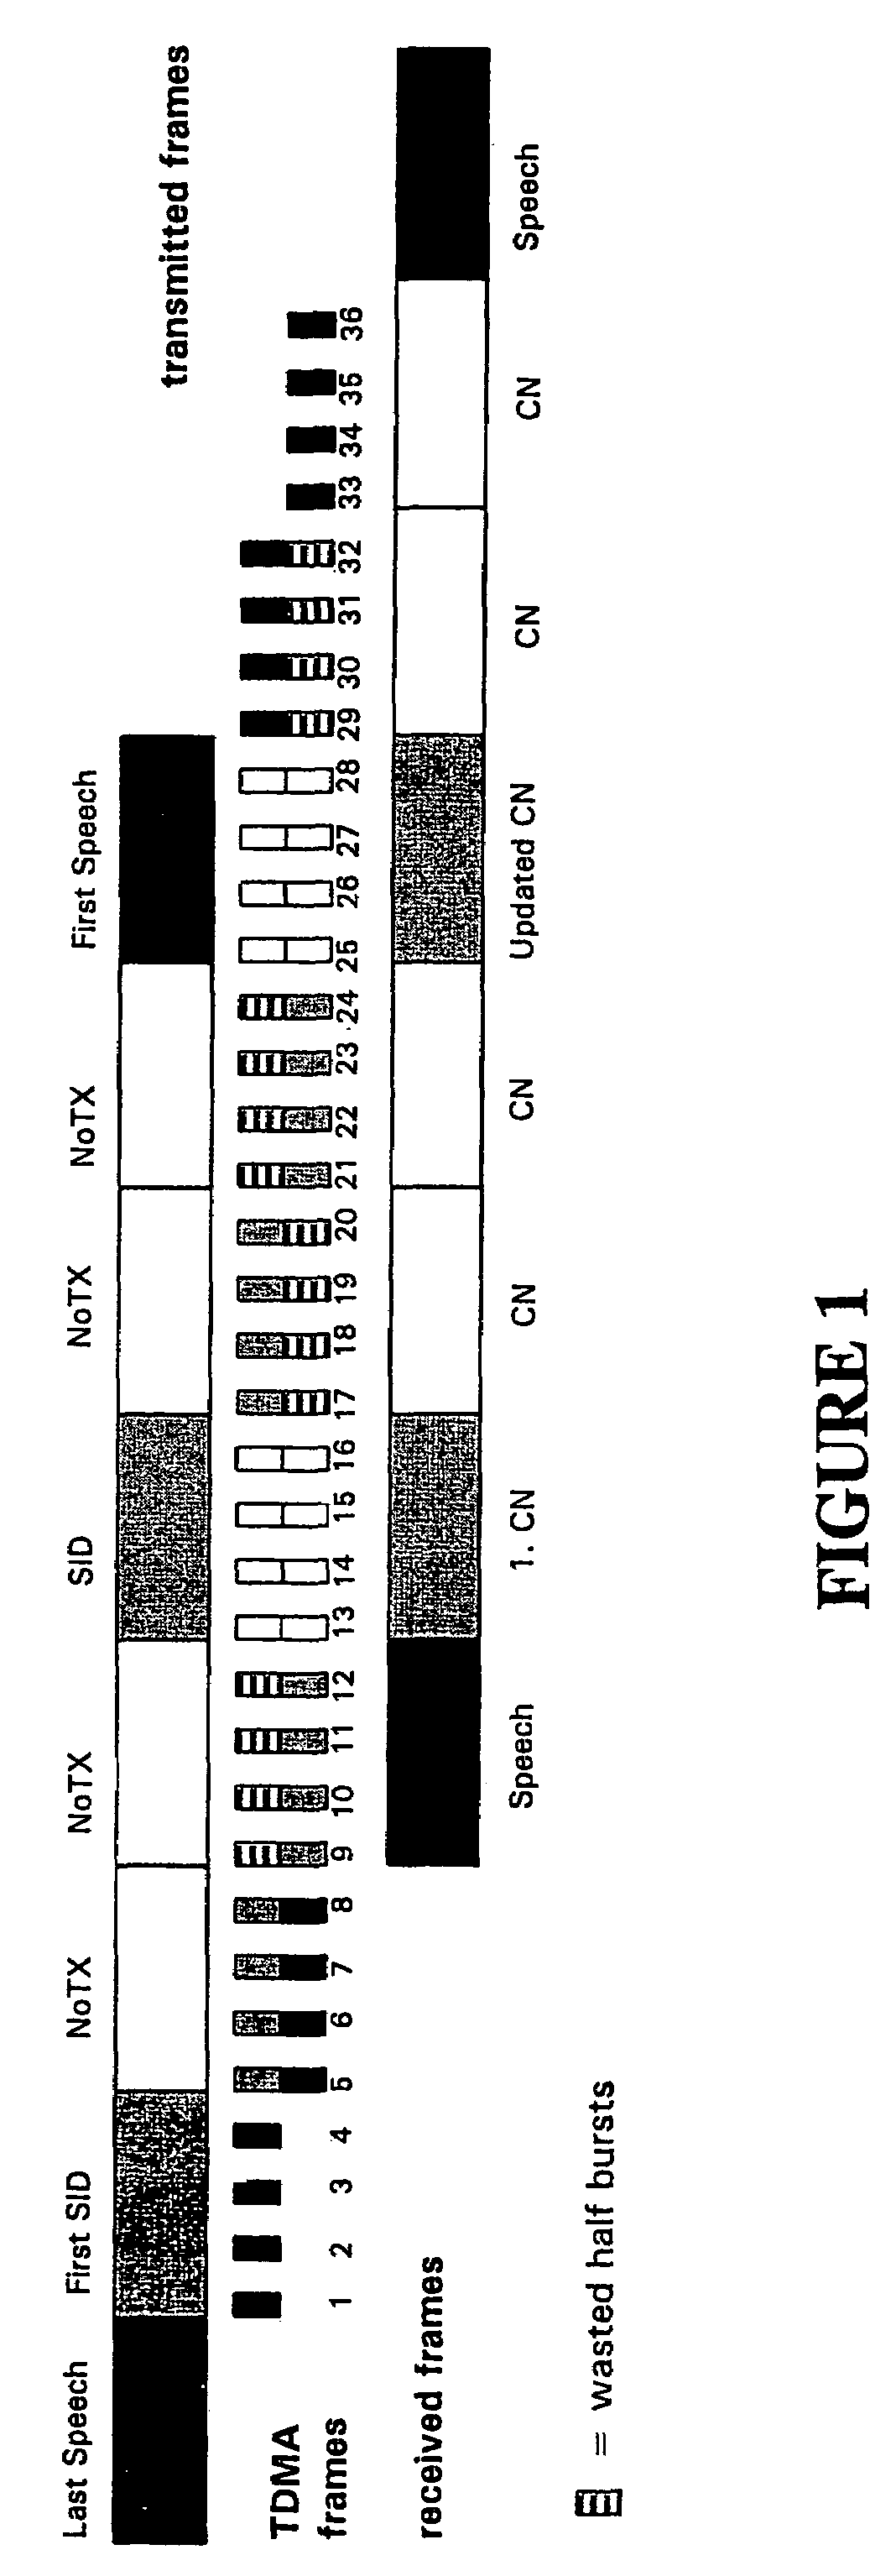 Efficient in-band signaling for discontinuous transmission and configuration changes in adaptive multi-rate communications systems